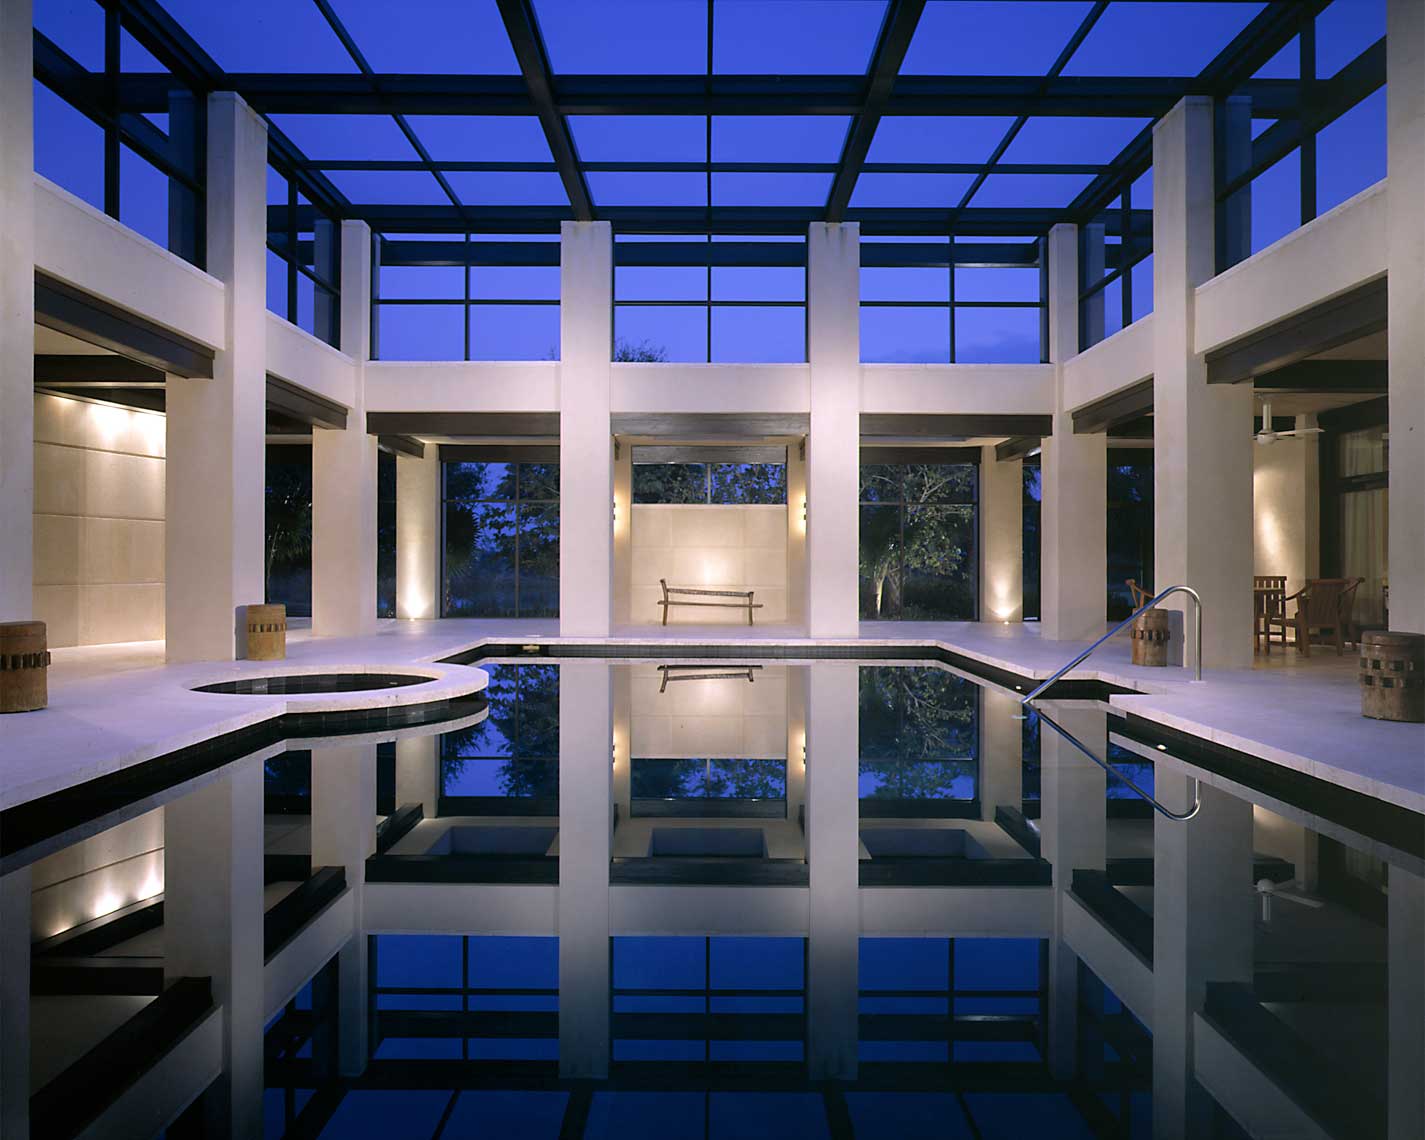 Interior view of a swimming pool in a Naples Residence shot at twilight